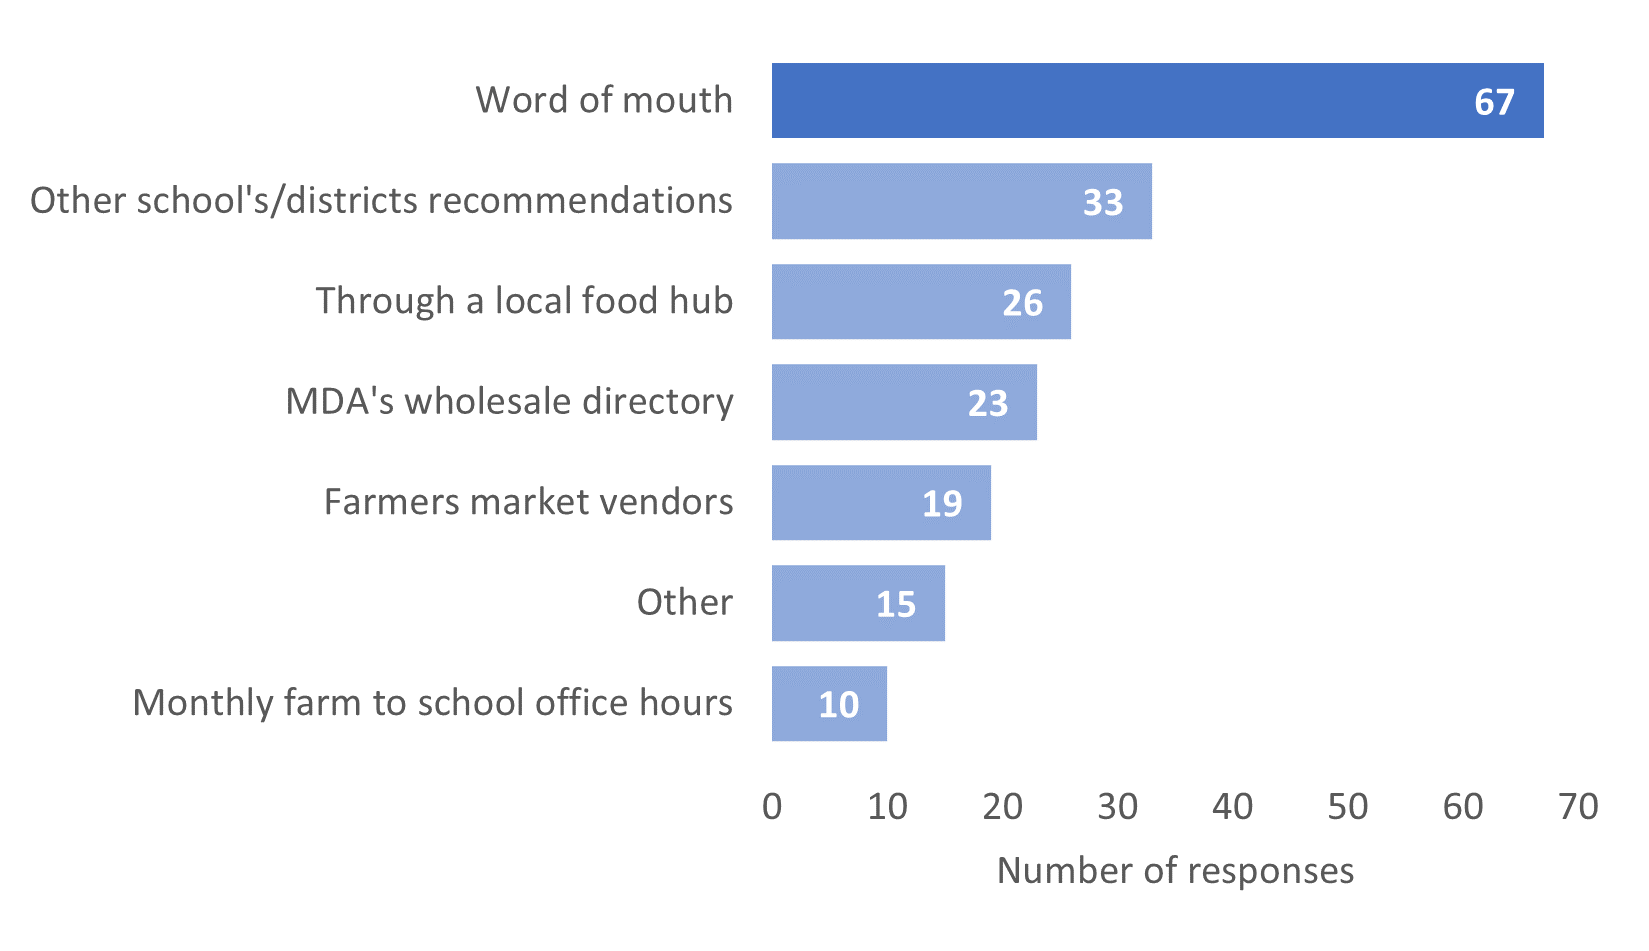 Bar graph. Word of mouth: 67. Other districts recommendations: 33. Through a local food hub: 26. MDA's wholesale directory: 23. Farmers market vendors: 19. Other: 15. Monthly farm to school office hours: 10.